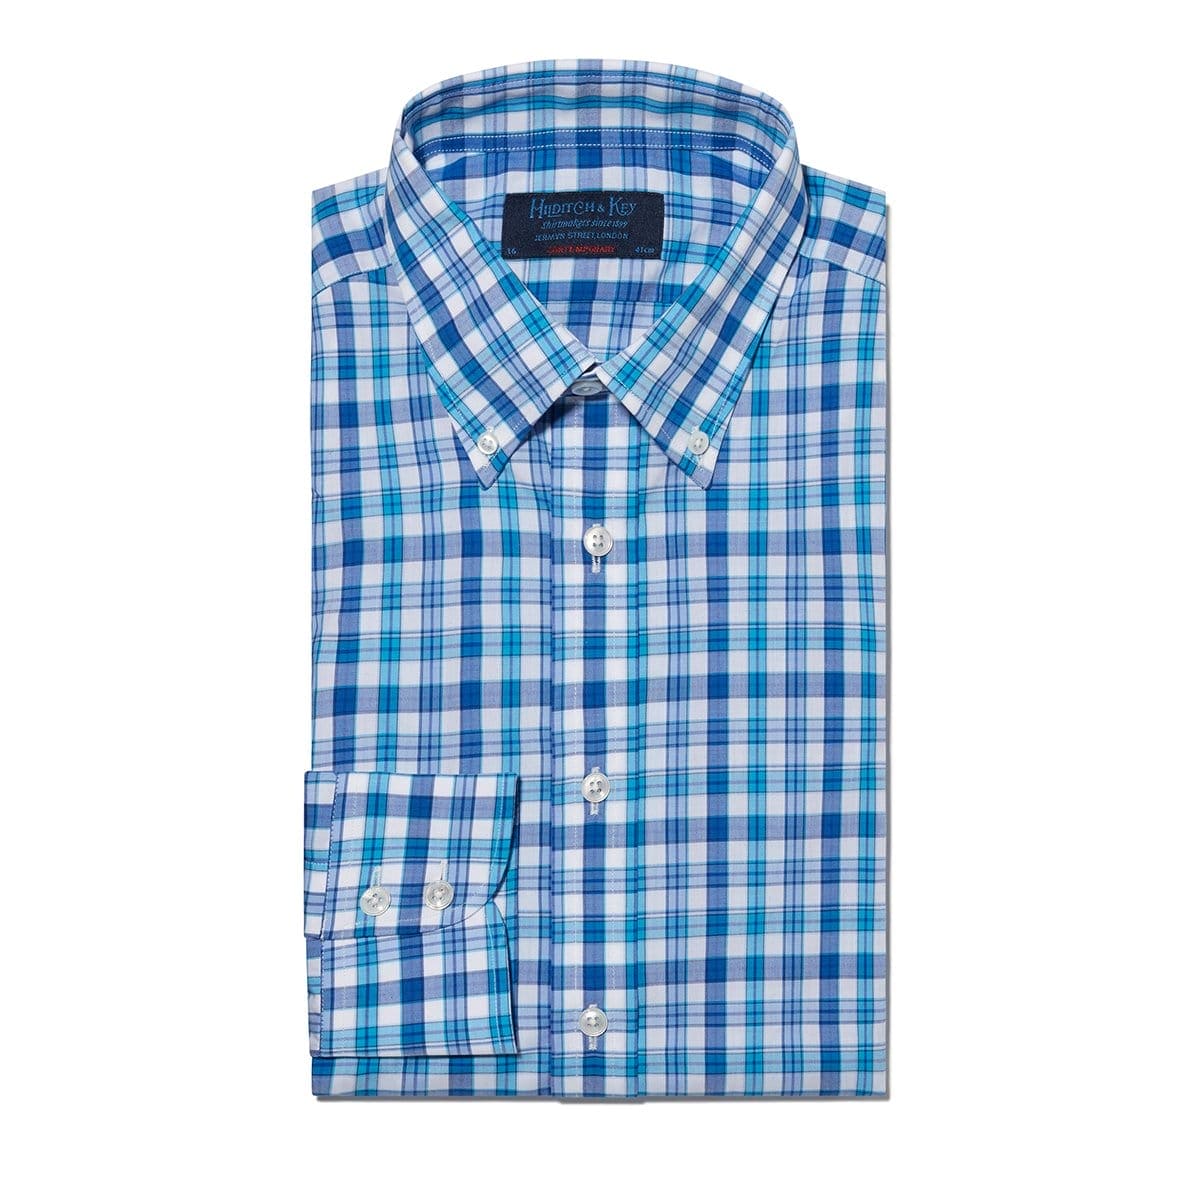 Contemporary Fit, Button Down Collar, 2 Button Cuff Shirt In Blue Check